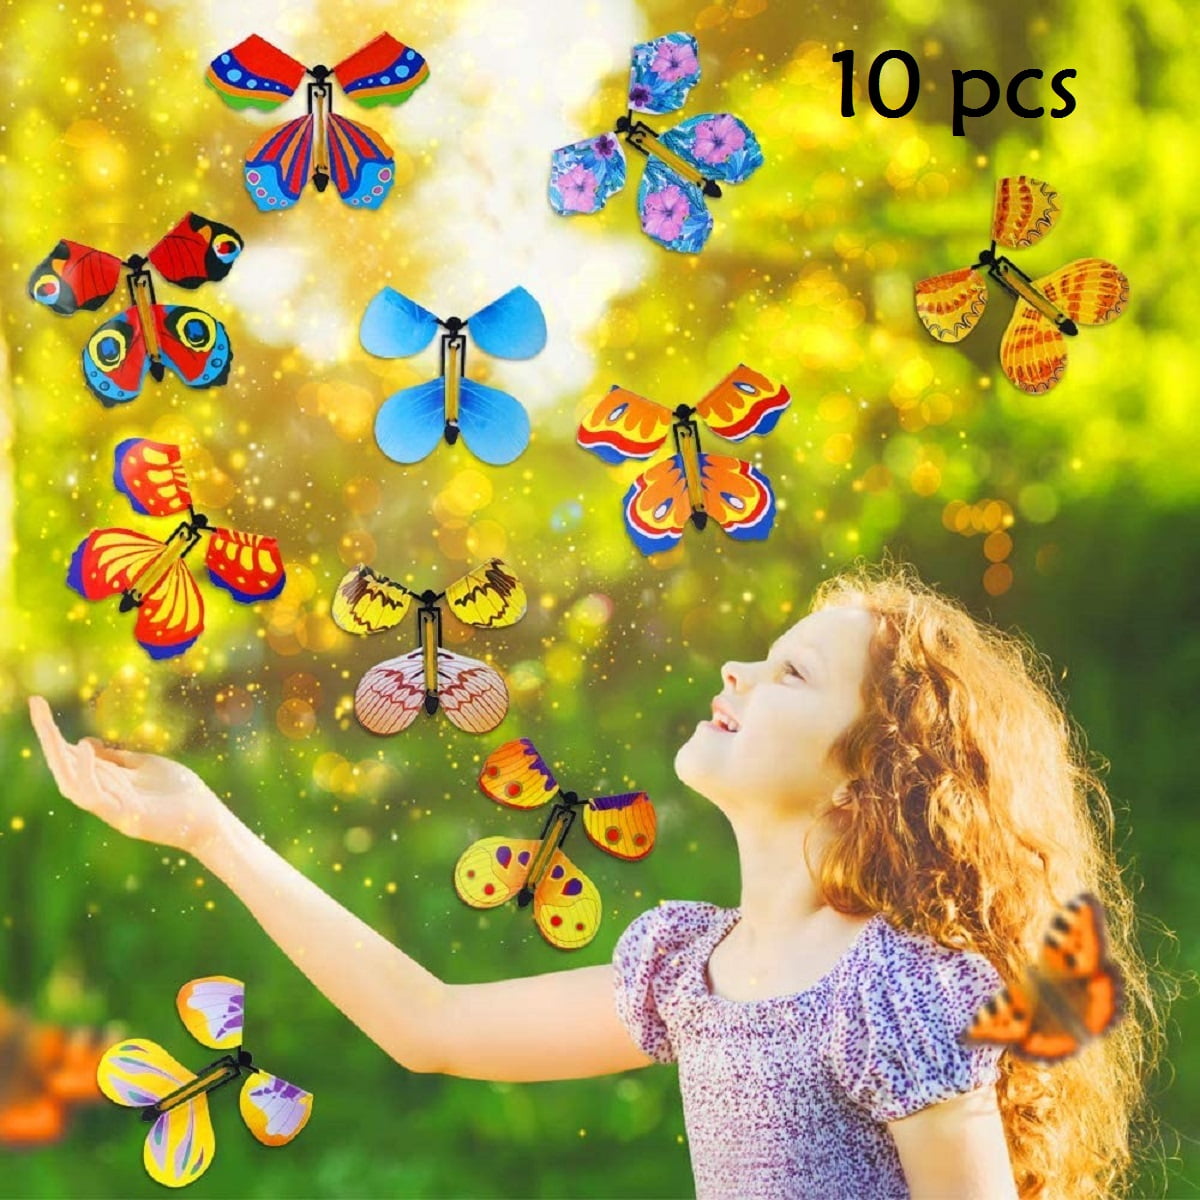 Details about   10Pcs Flying Butterfly greeting Card book Magic Toy fly wind up 